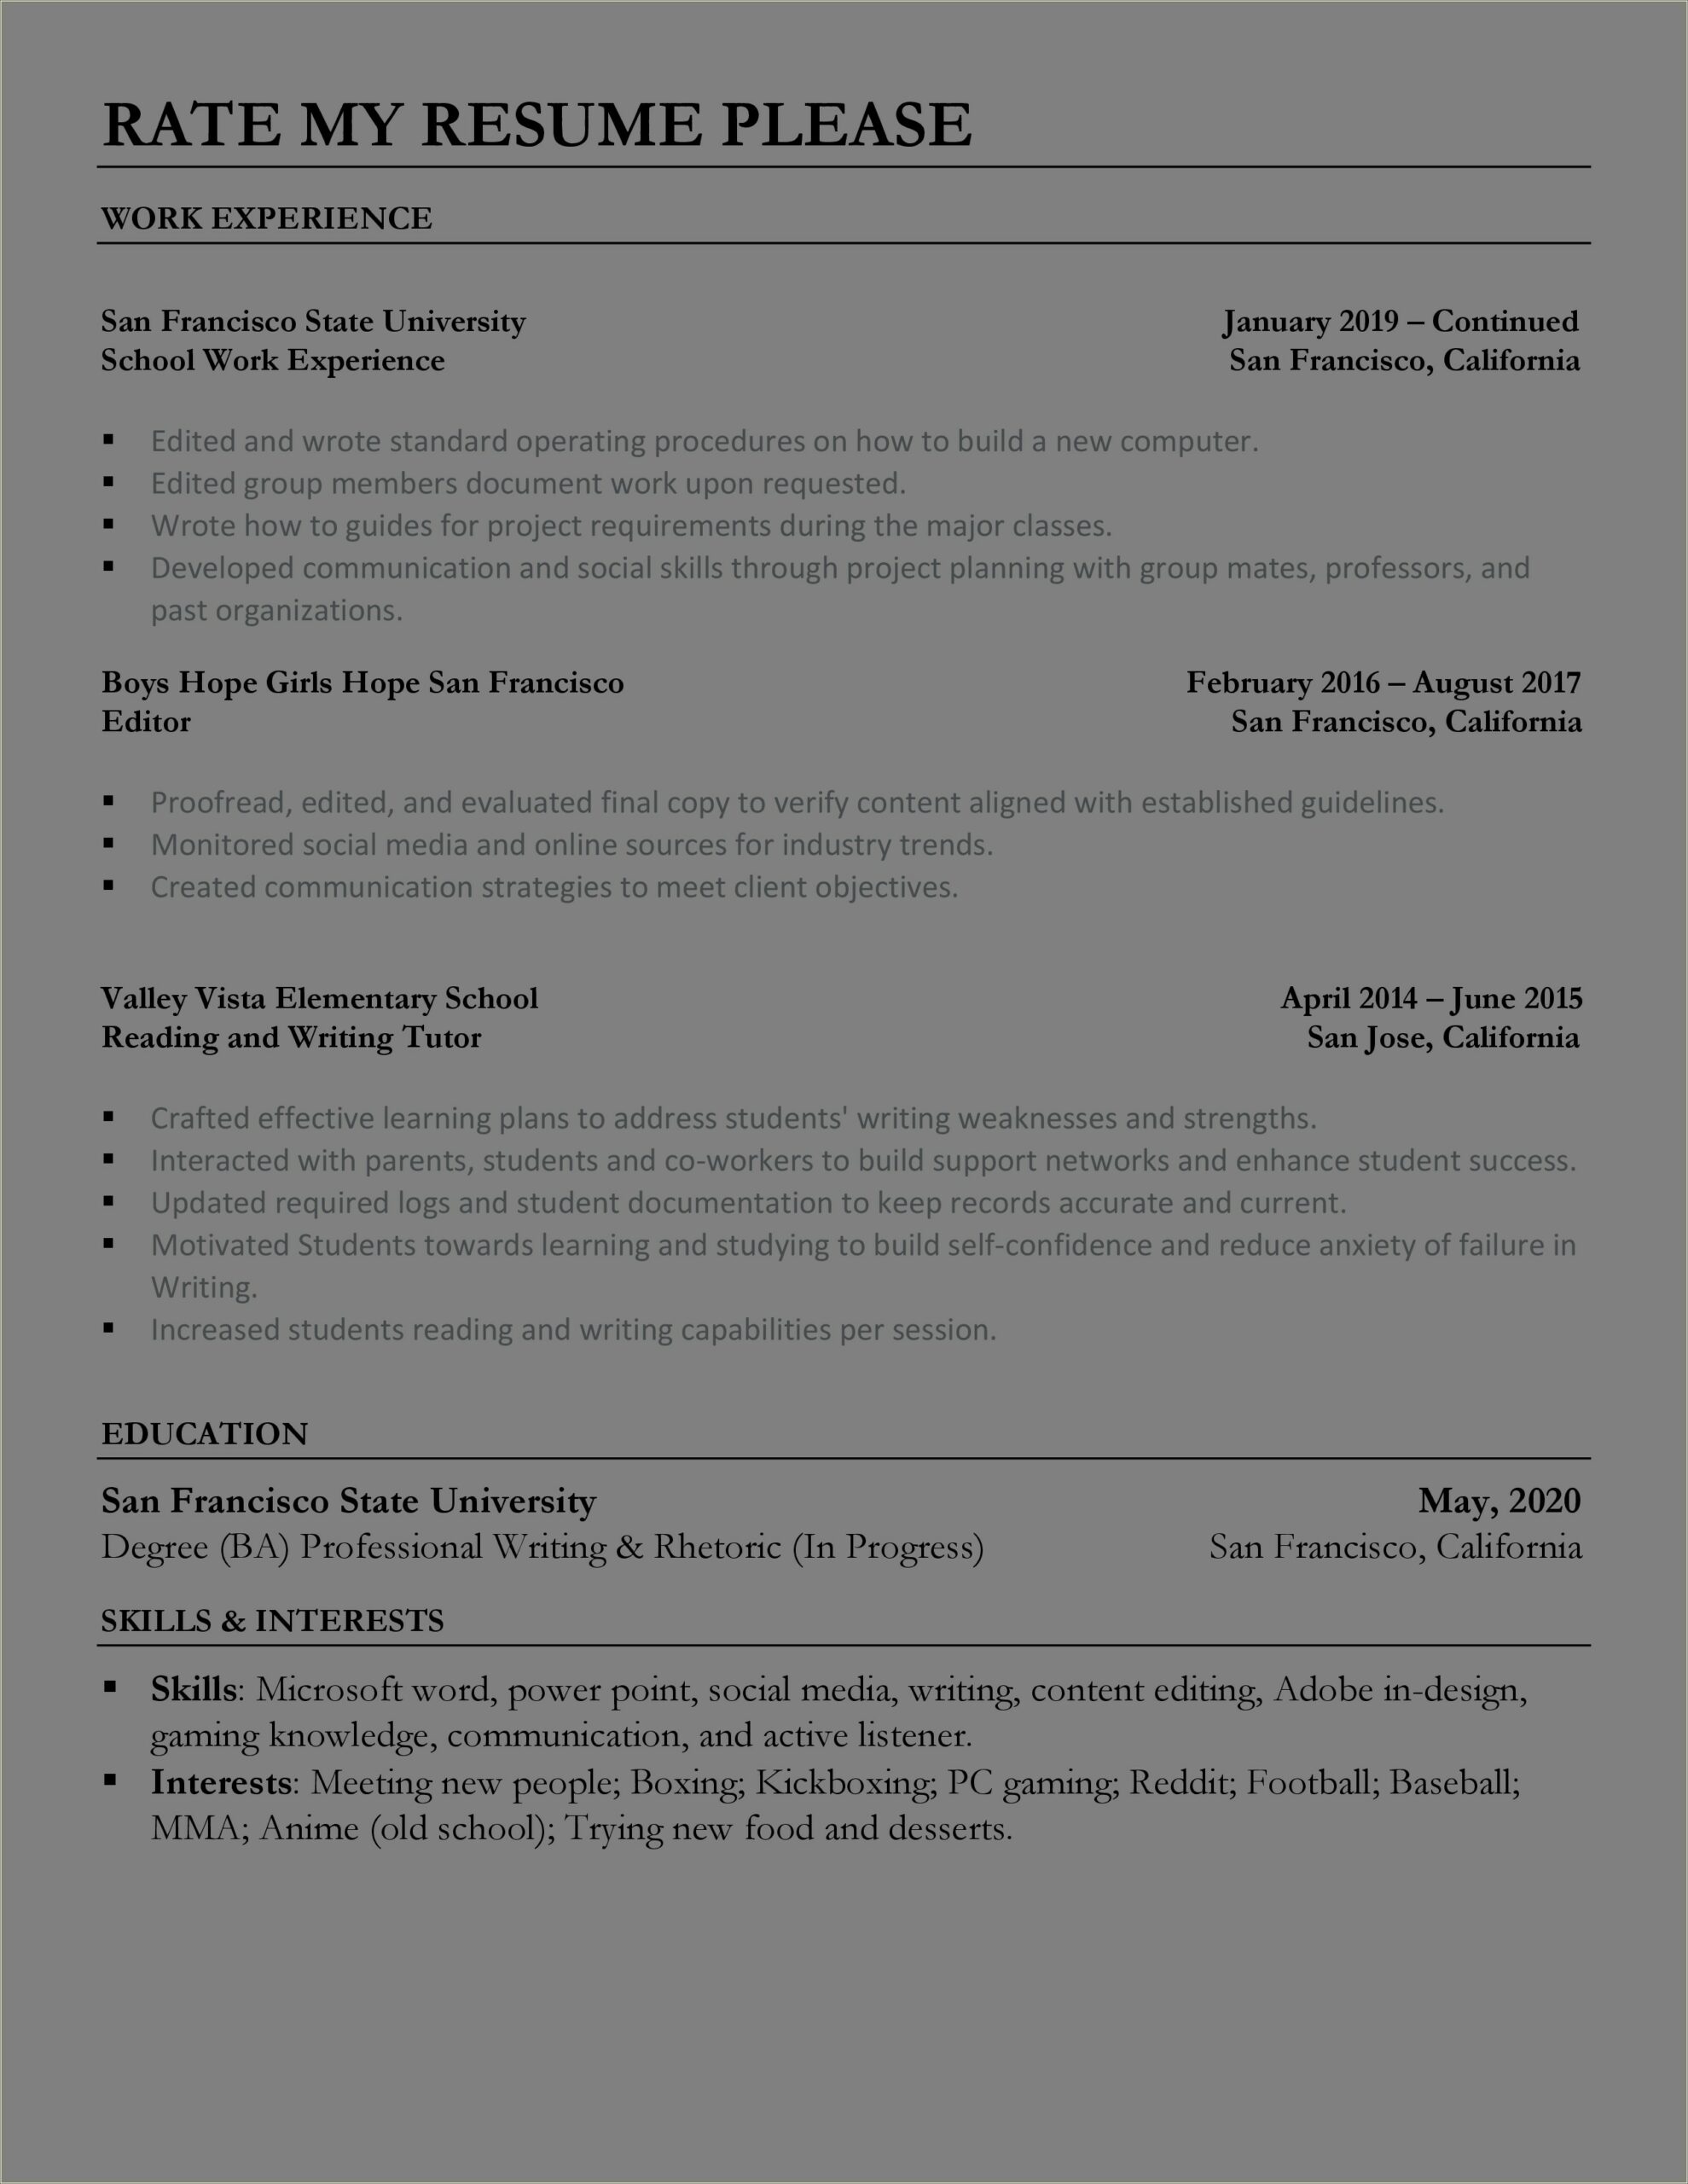 Word For Work Well With Others Resume Reddit